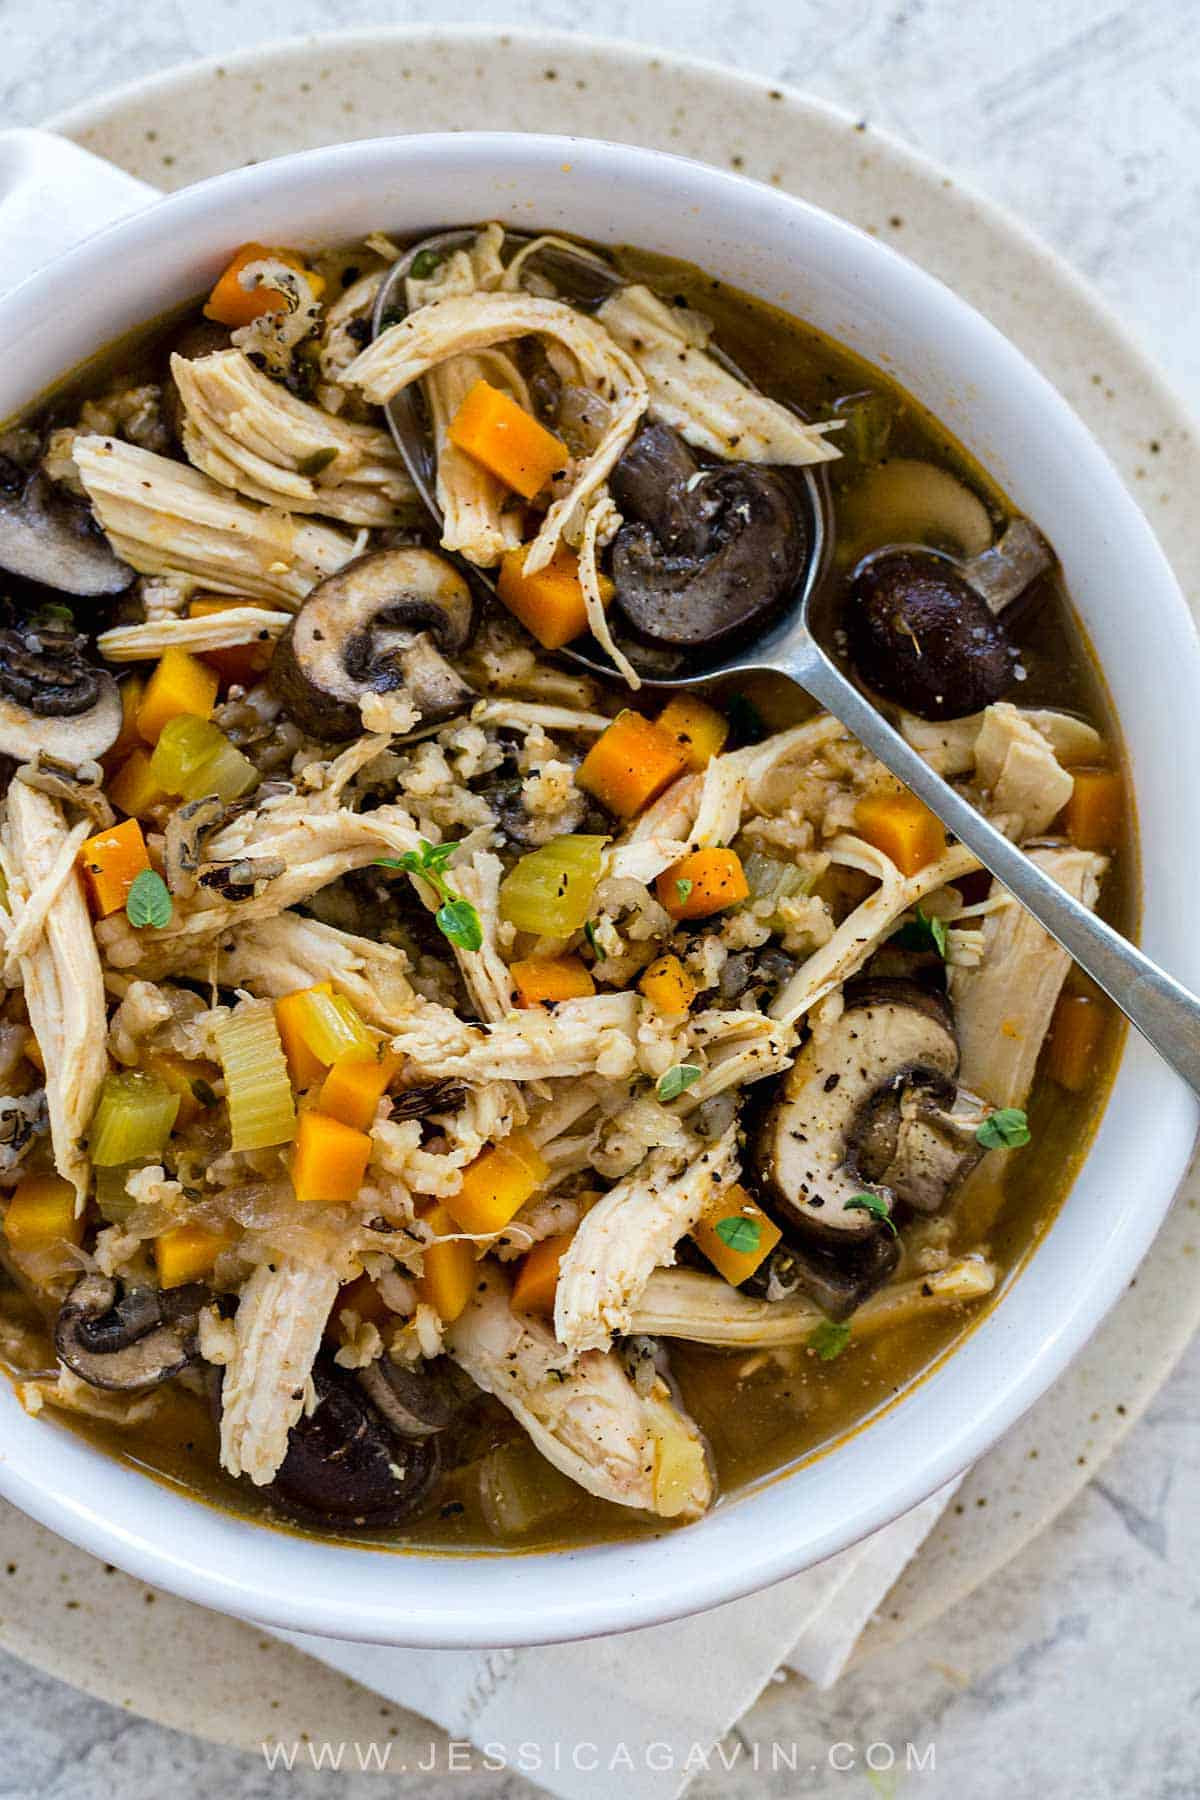 Chicken And Wild Rice Soup Recipe
 Slow Cooker Chicken and Wild Rice Soup Jessica Gavin